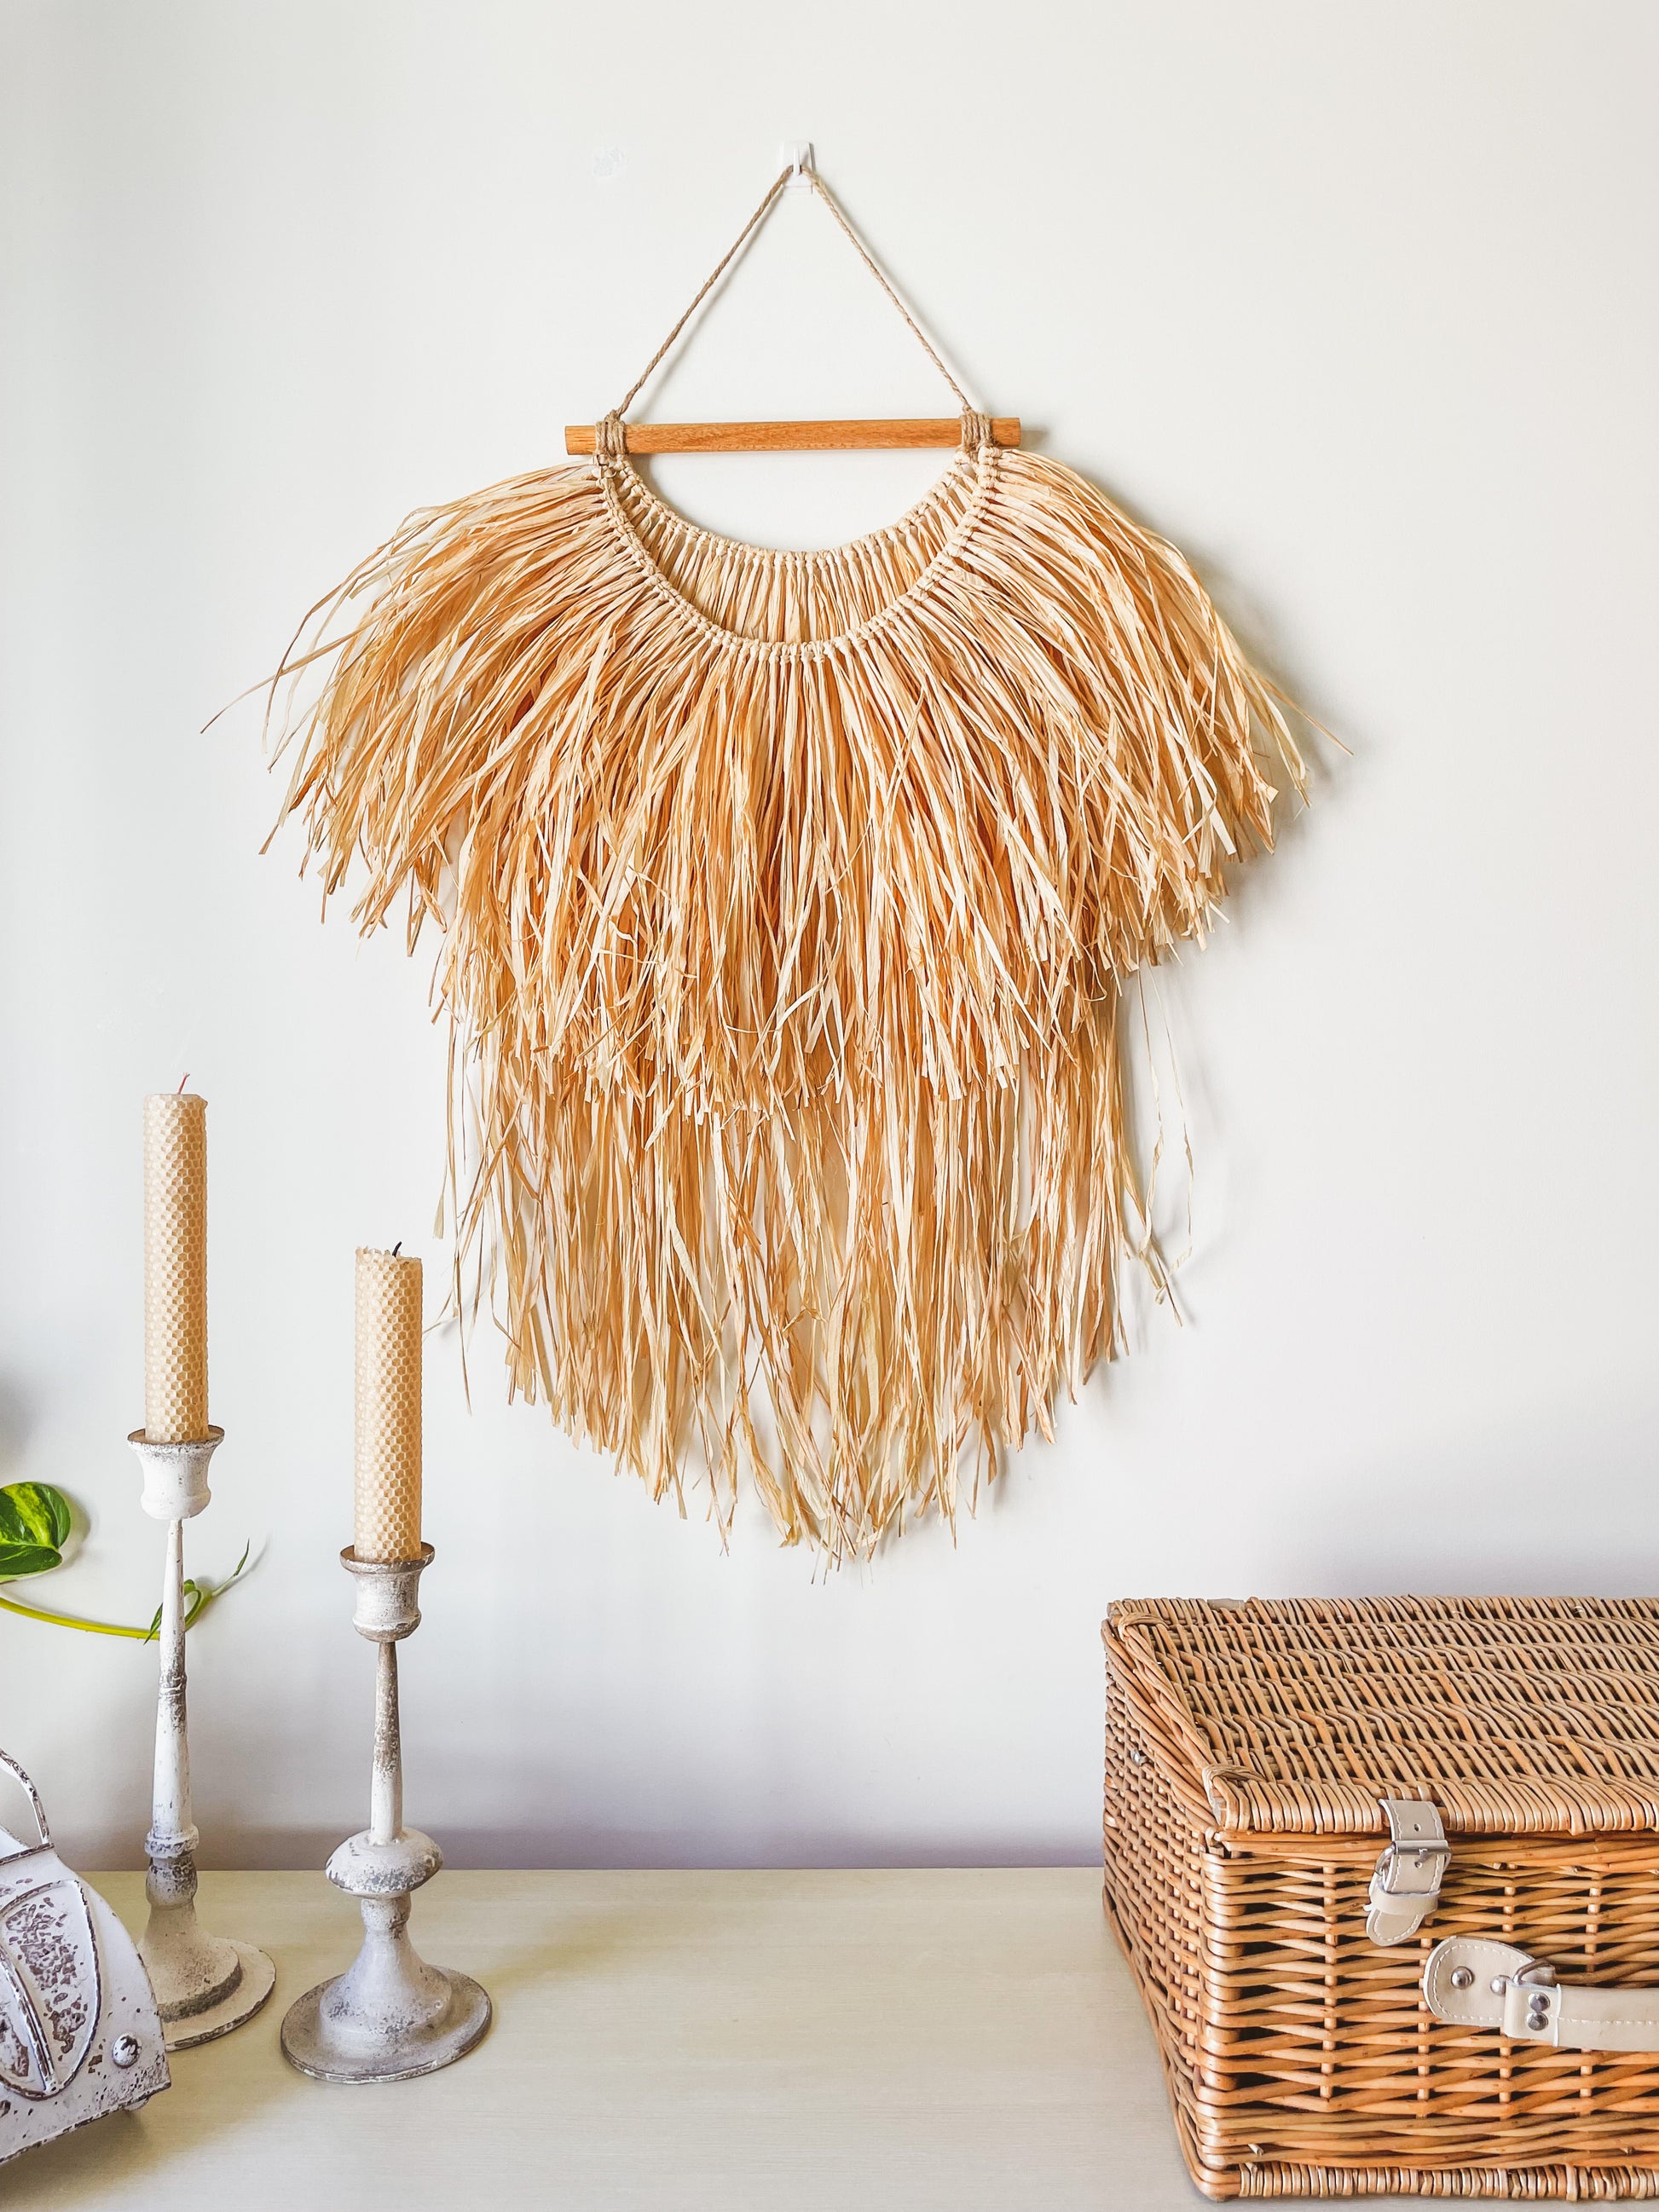 Large raffia wall hanging hanged on a wall above a sideboard styled with a rattan picknic basket and candles